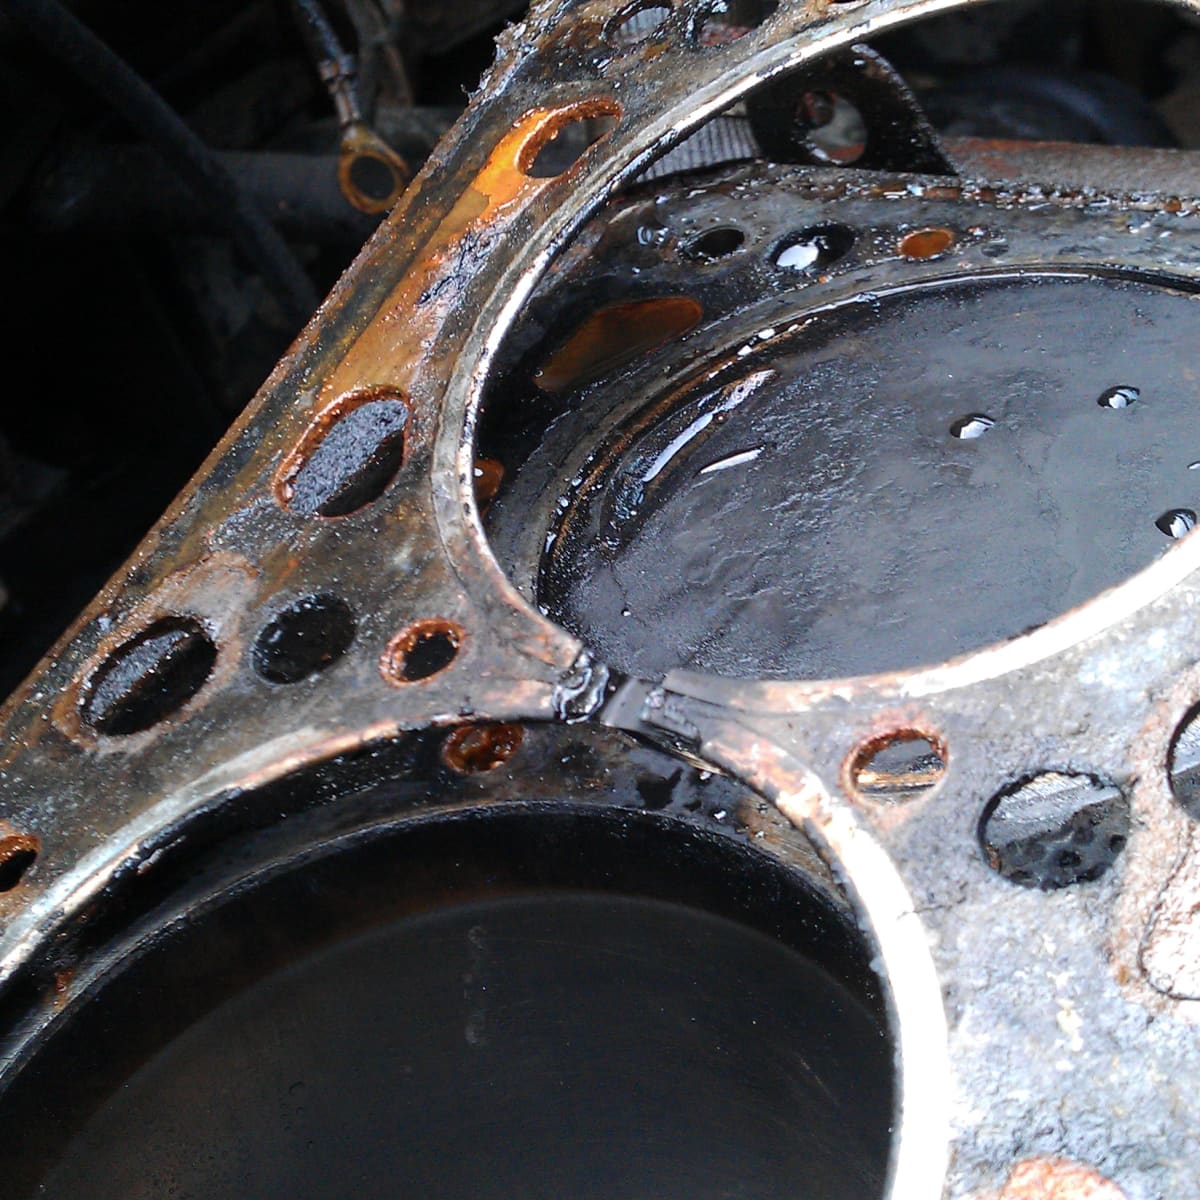 Does a blown head gasket always cause overheating?